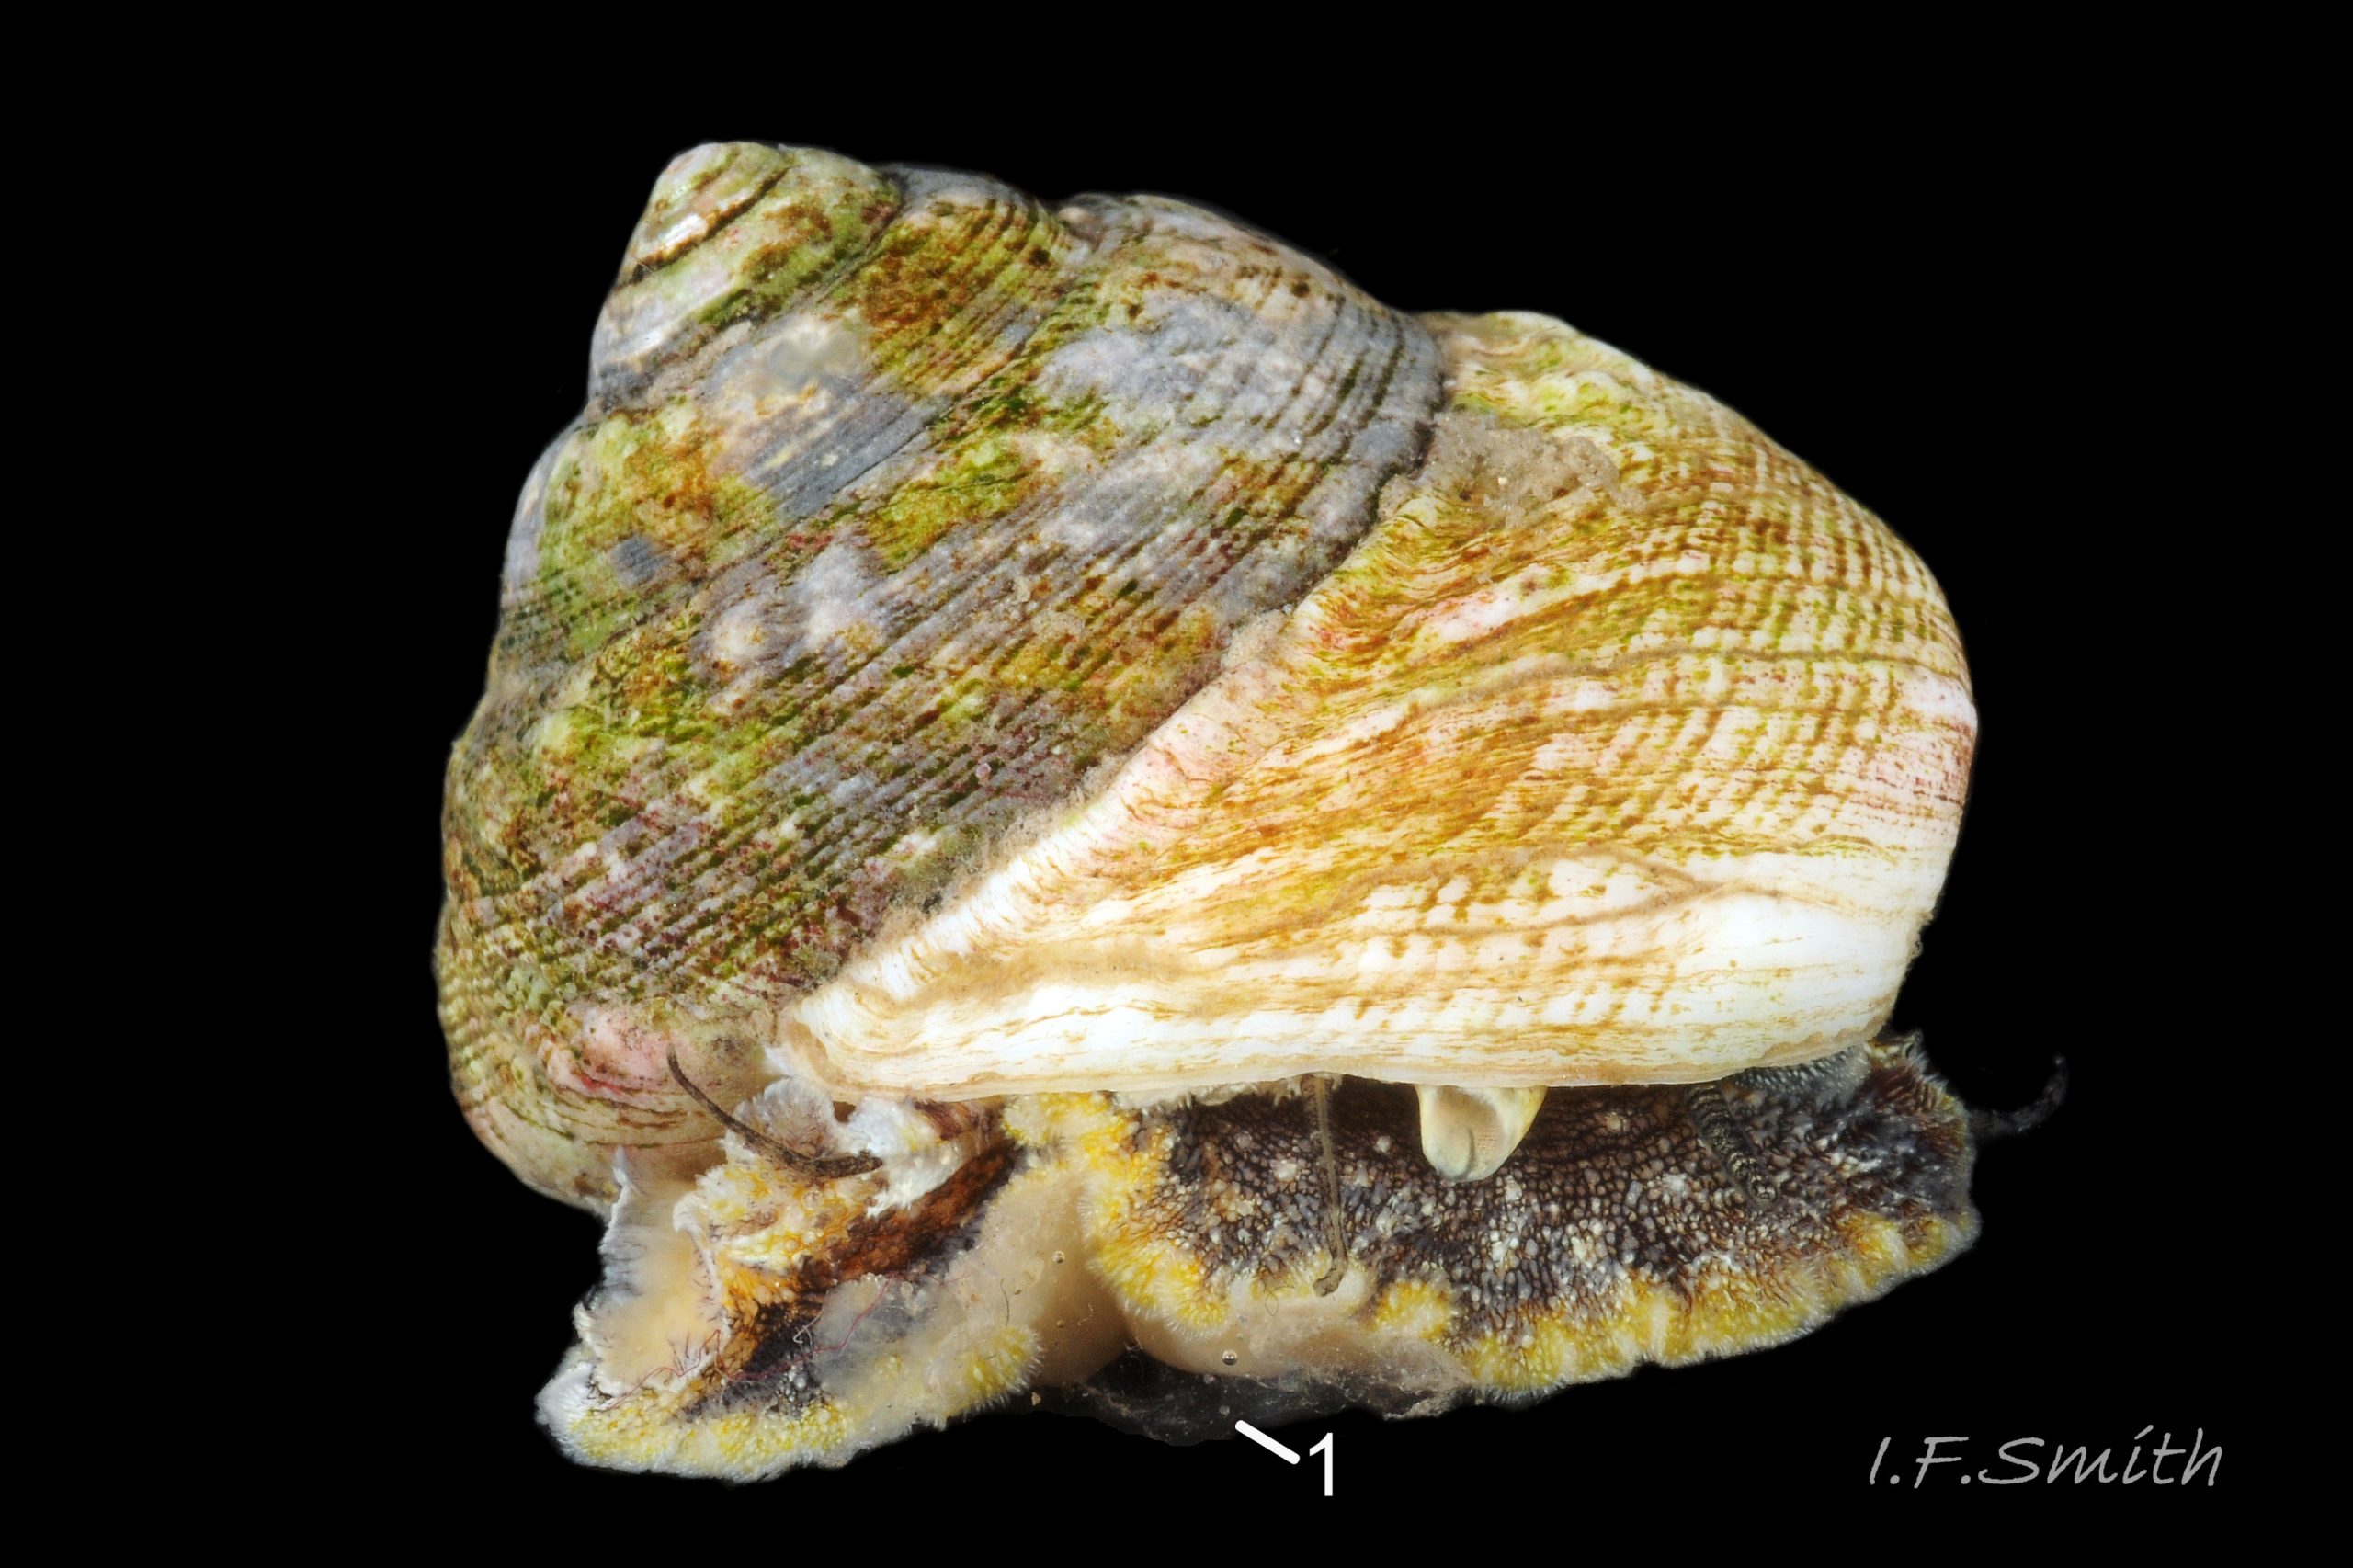 01 Gibbula magus. Large specimen, height (apex to base of shell) 25.5 mm, breadth 31.5 mm. Cardigan Bay, Wales. 2015.